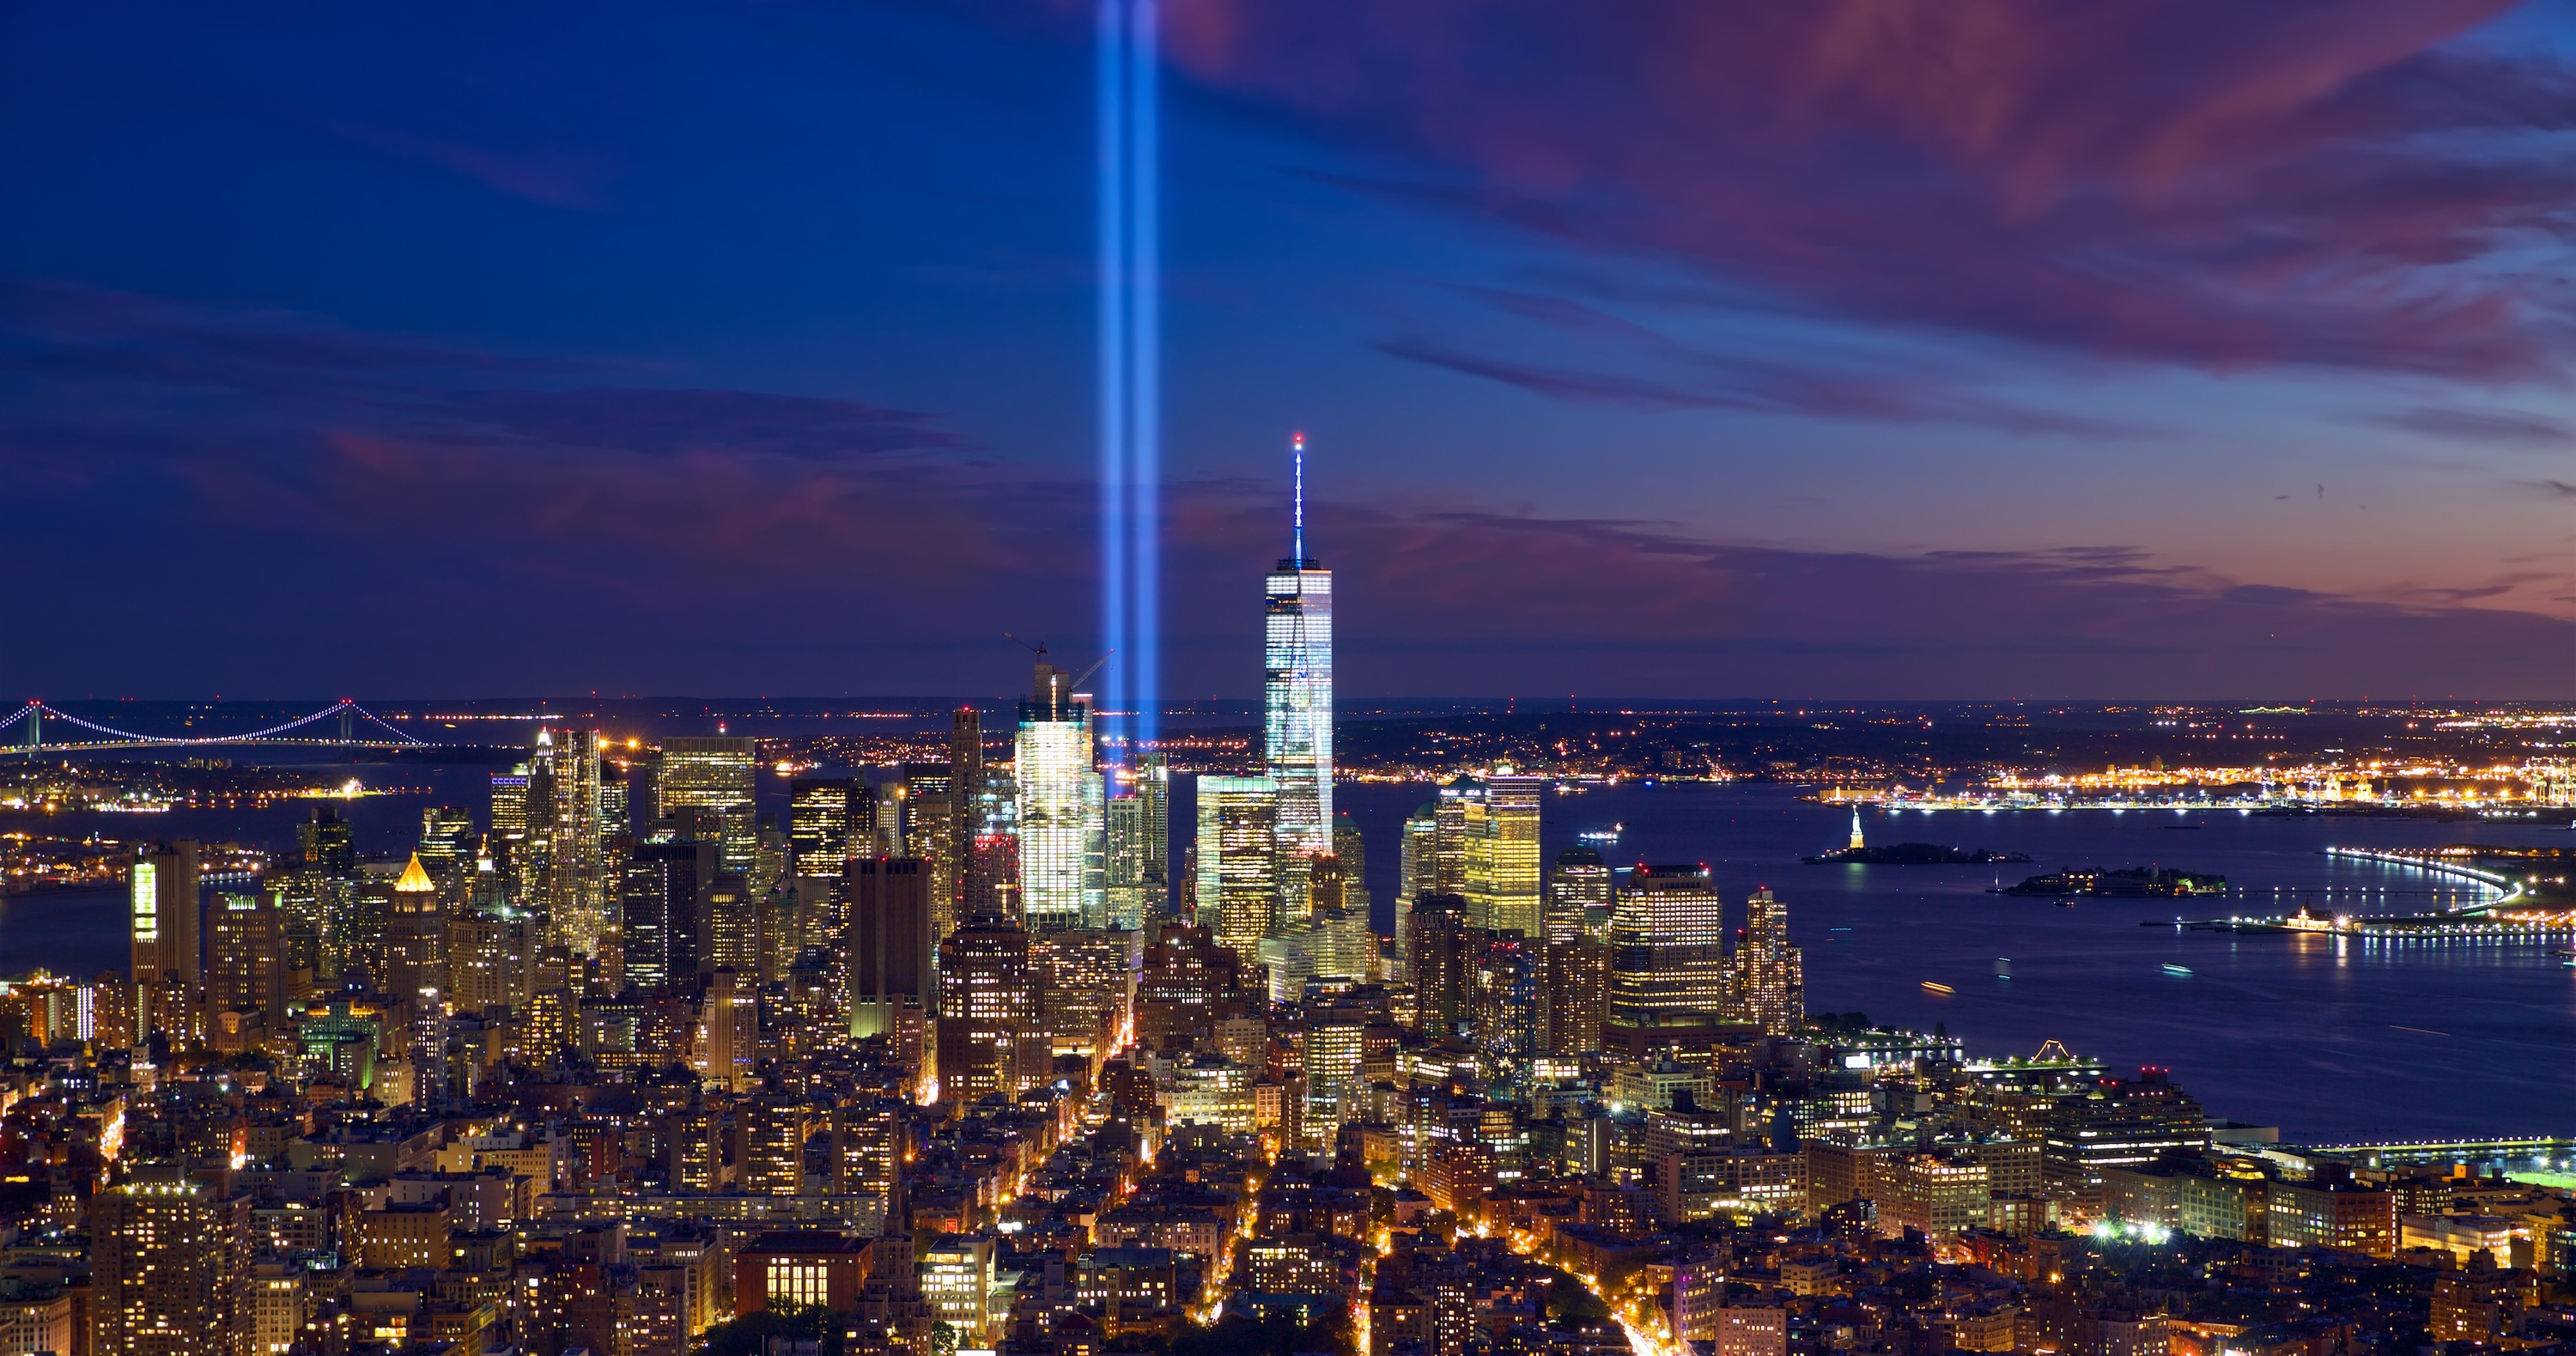 The 9/11 tribute lights returned to NYC